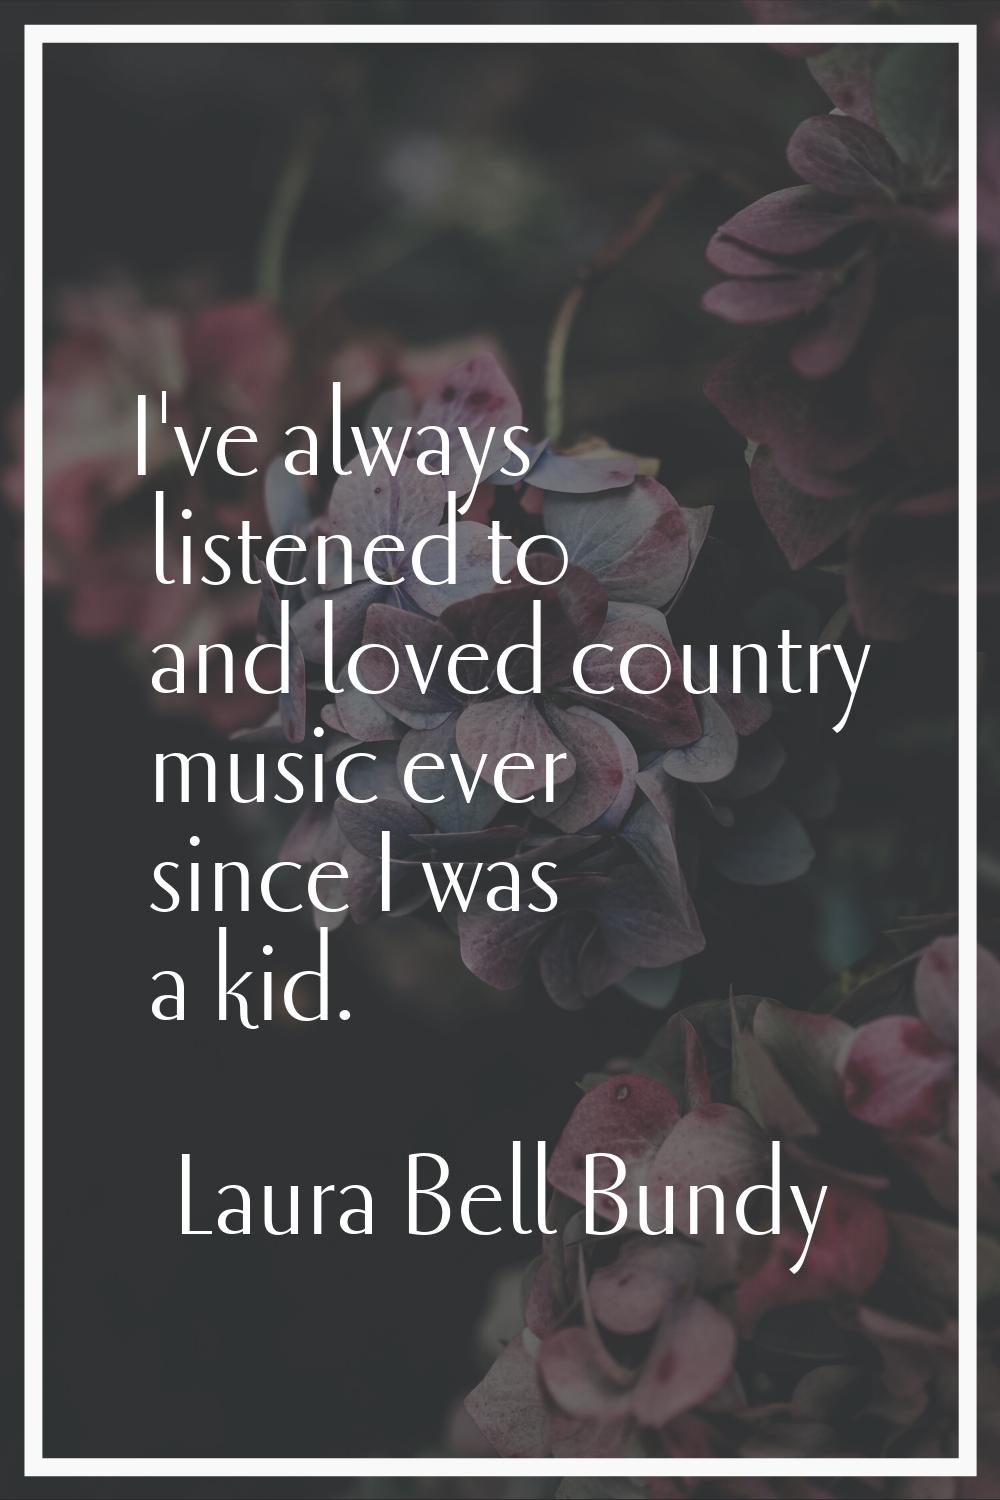 I've always listened to and loved country music ever since I was a kid.